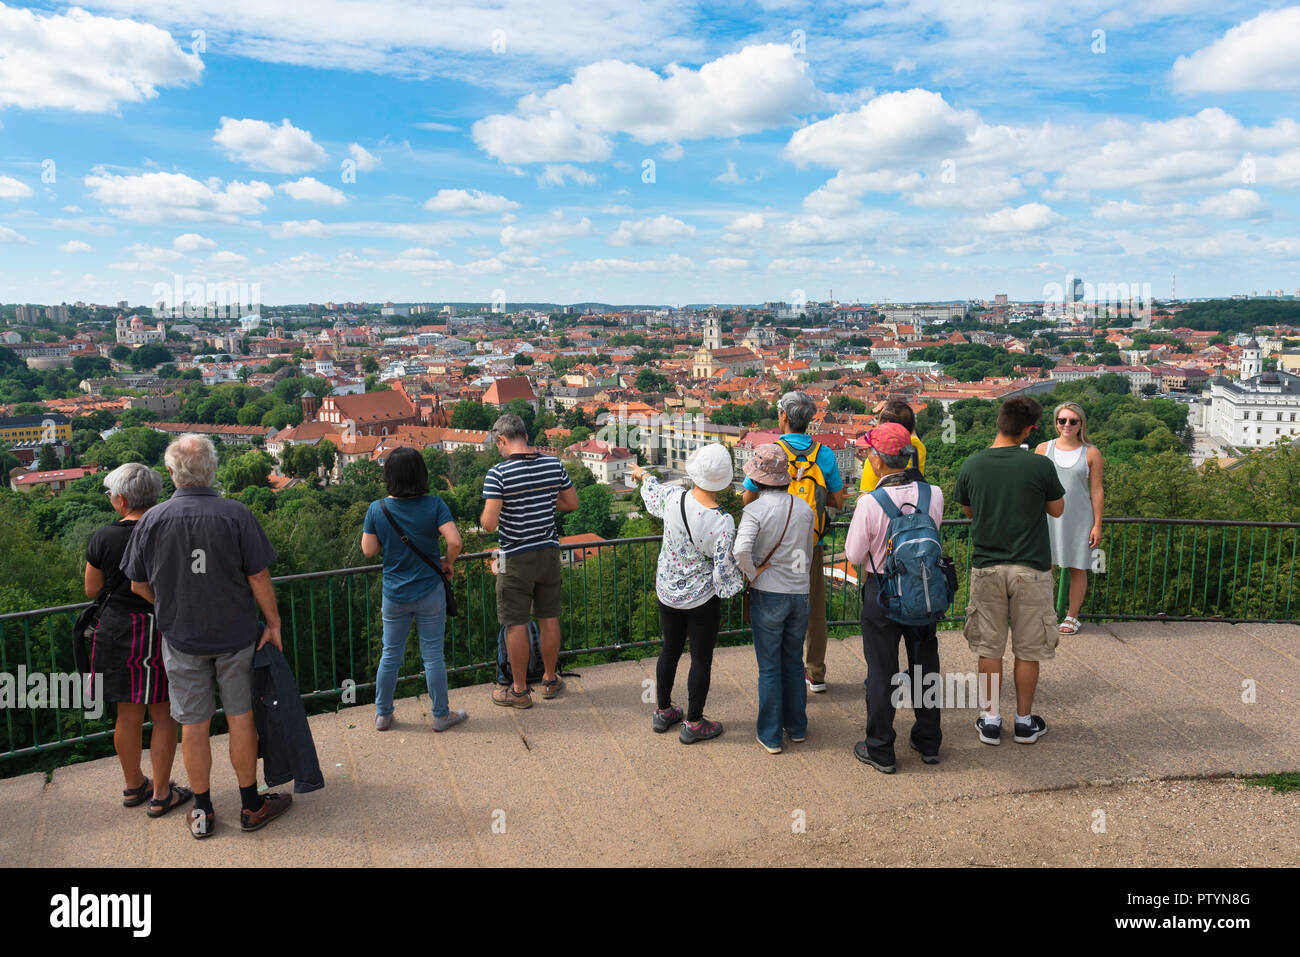 Tourism tourists Europe, on a summer day a group of tourists look down on the city of Vilnius from a viewing terrace on Three Crosses Hill, Lithuania. Stock Photo